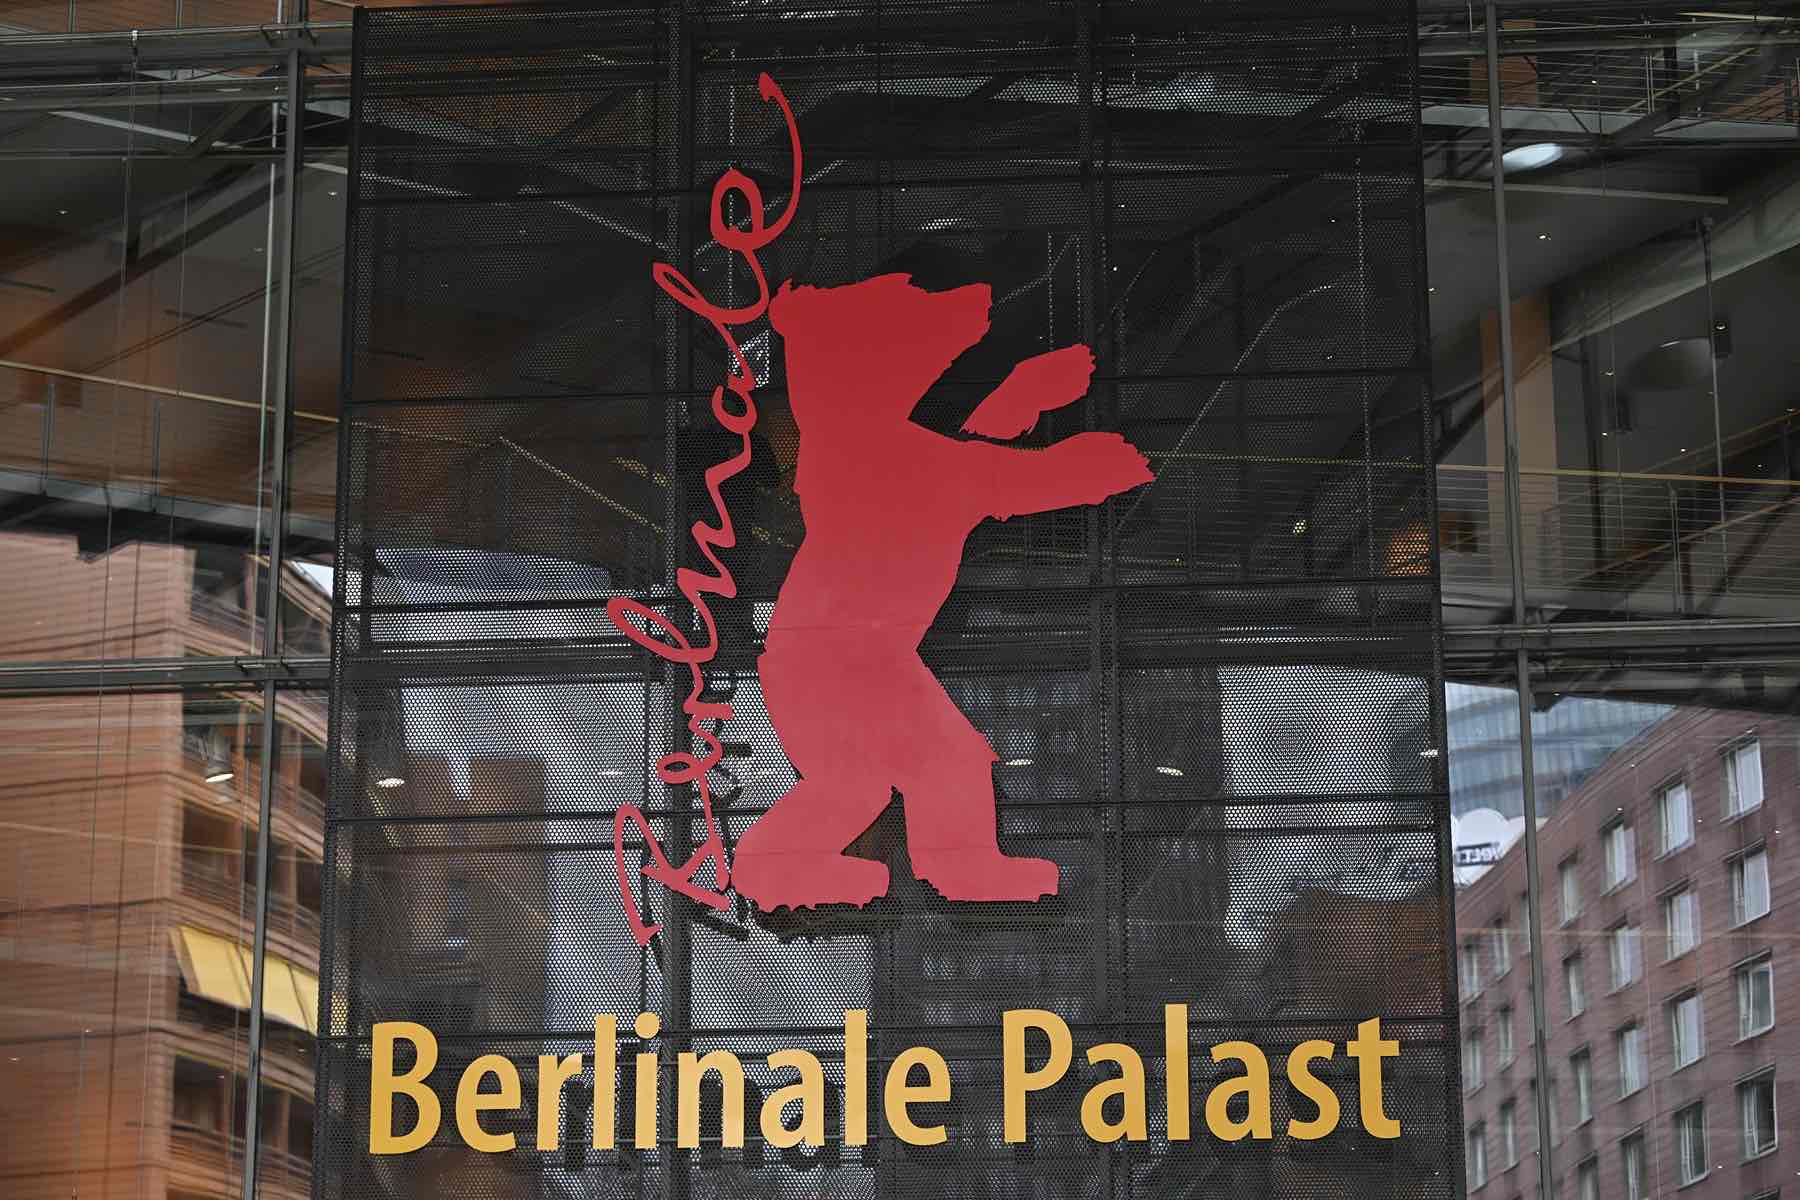 74th Berlinale